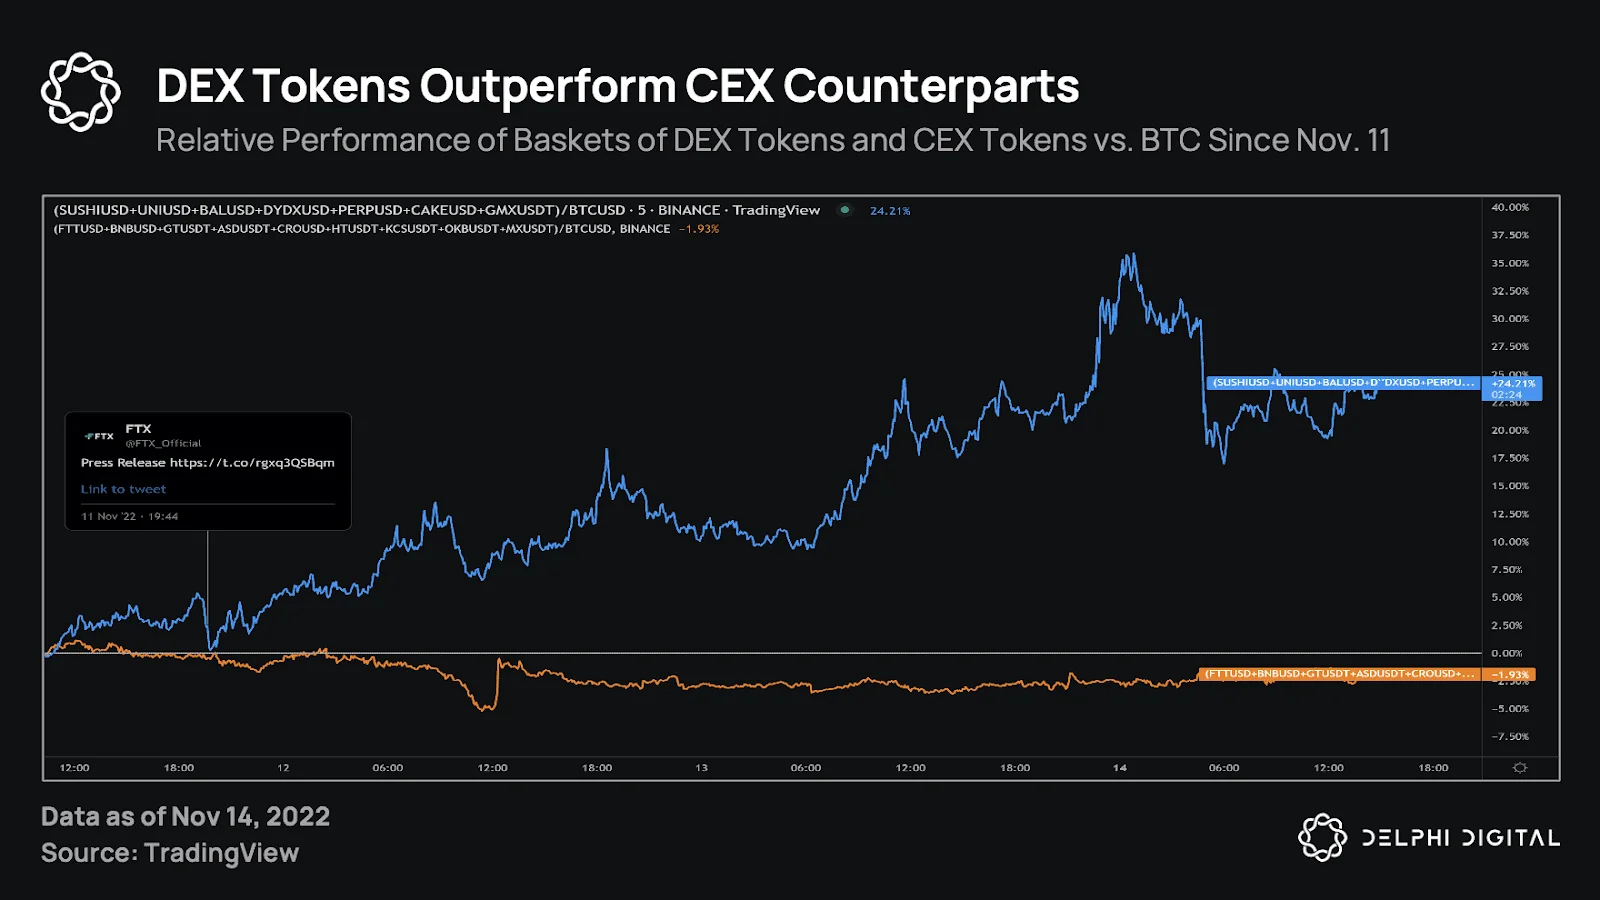 DEX tokens outperform their CEX counterparts